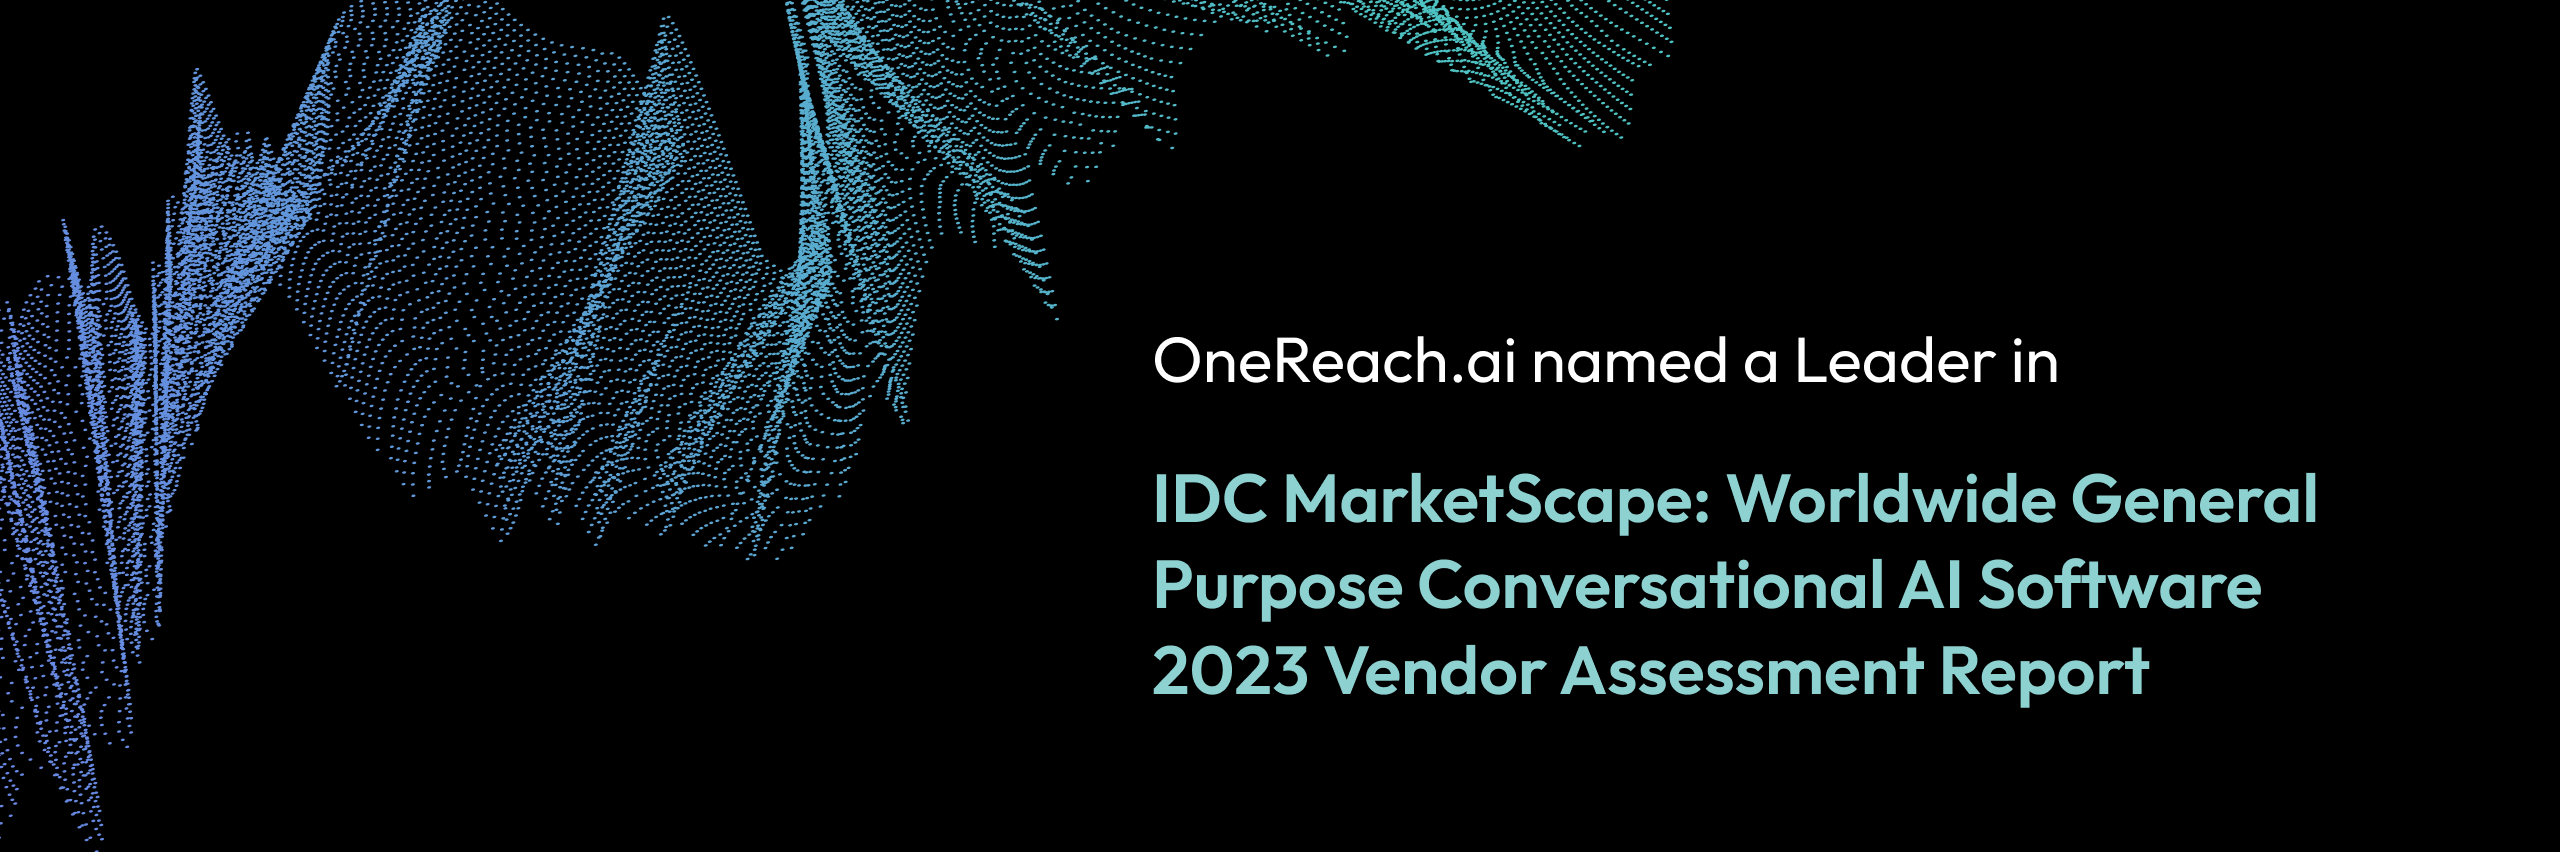 OneReach.ai Named a Leader in the IDC MarketScape for Conversational AI Software 2023